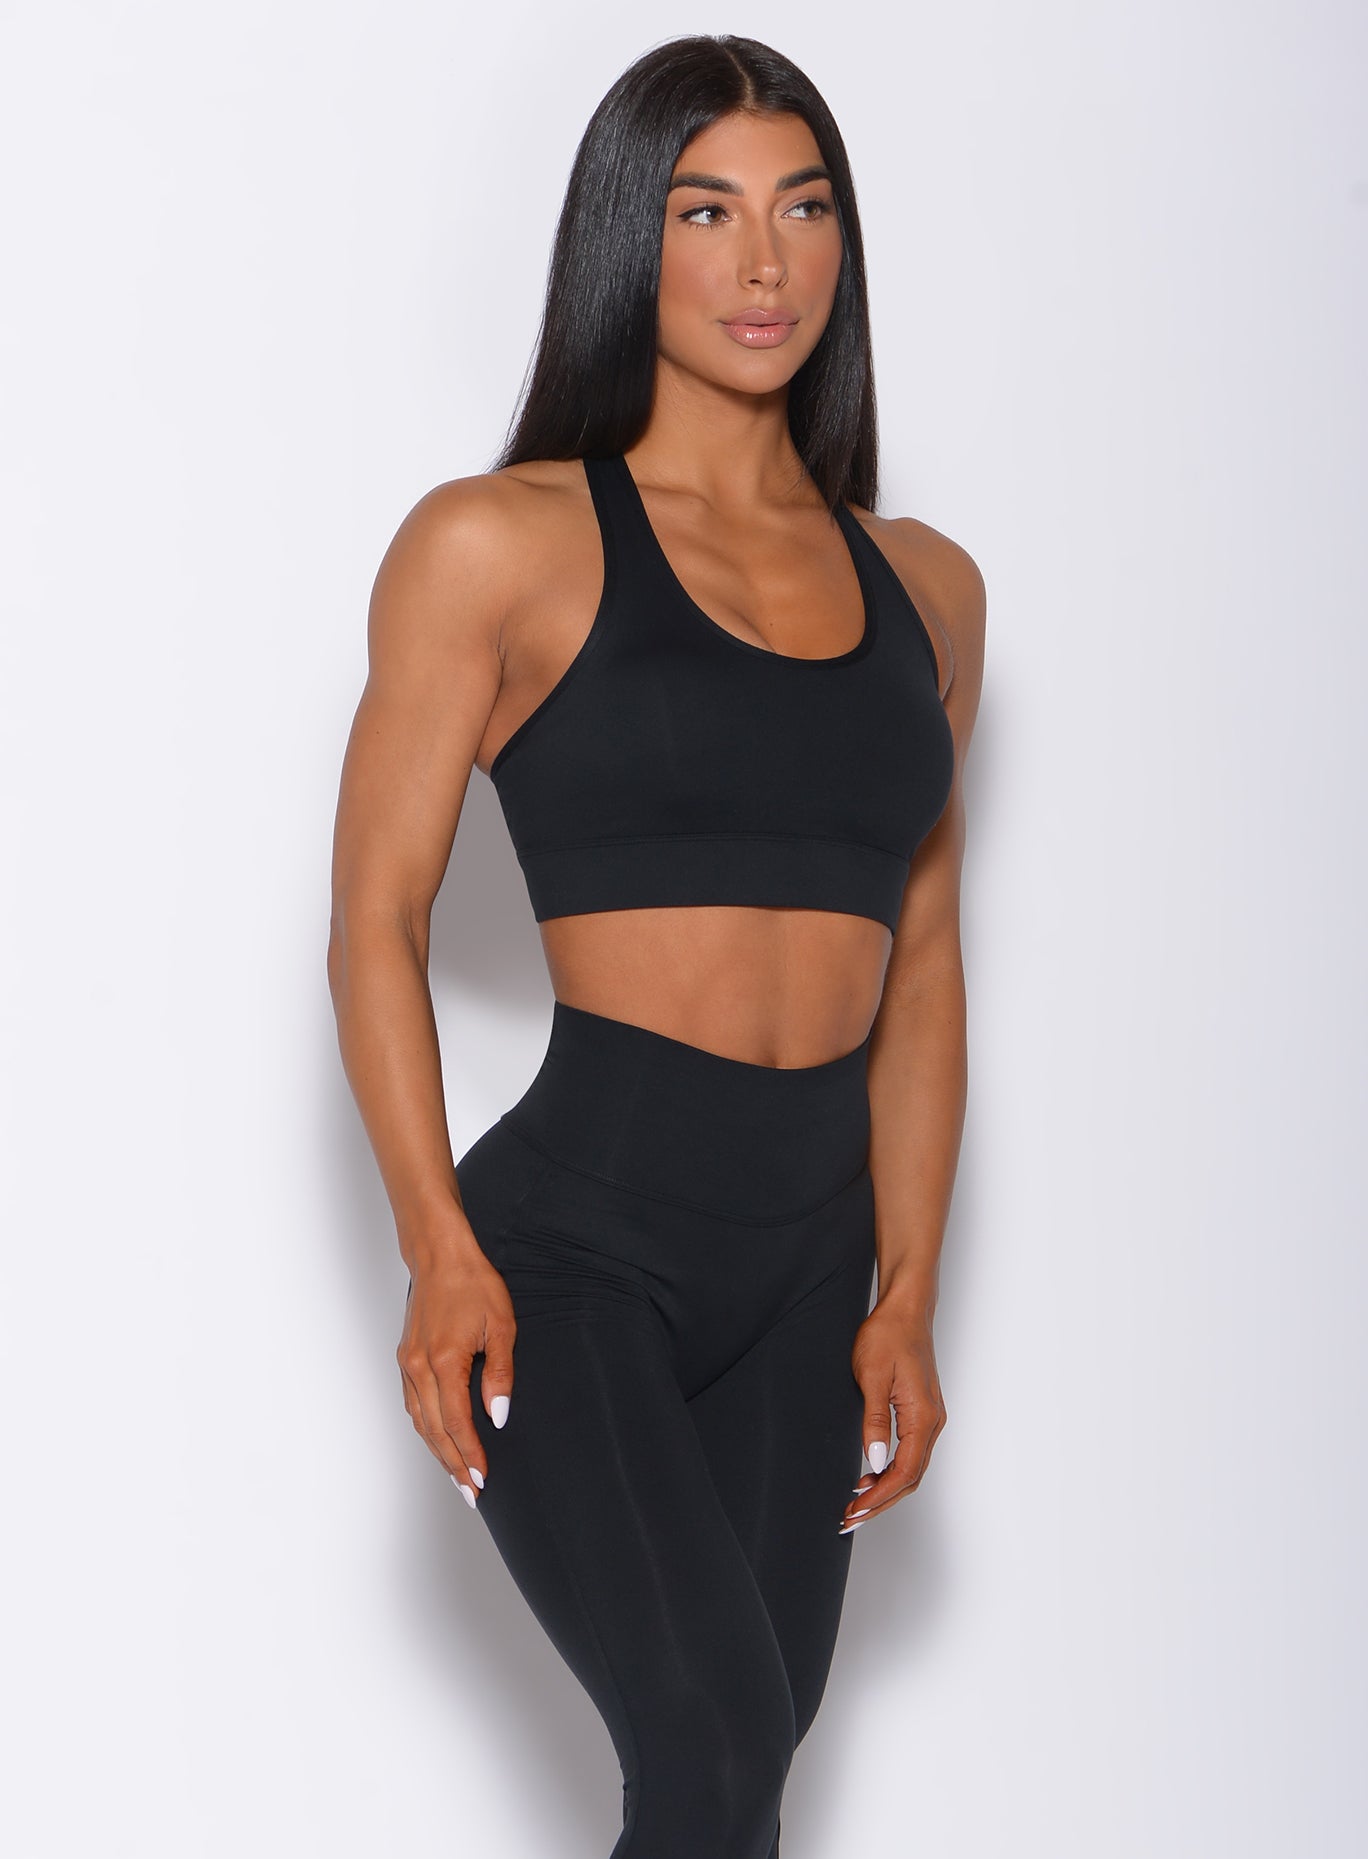 Front profile view of a model wearing our black rival sports bra and a matching sexy back leggings